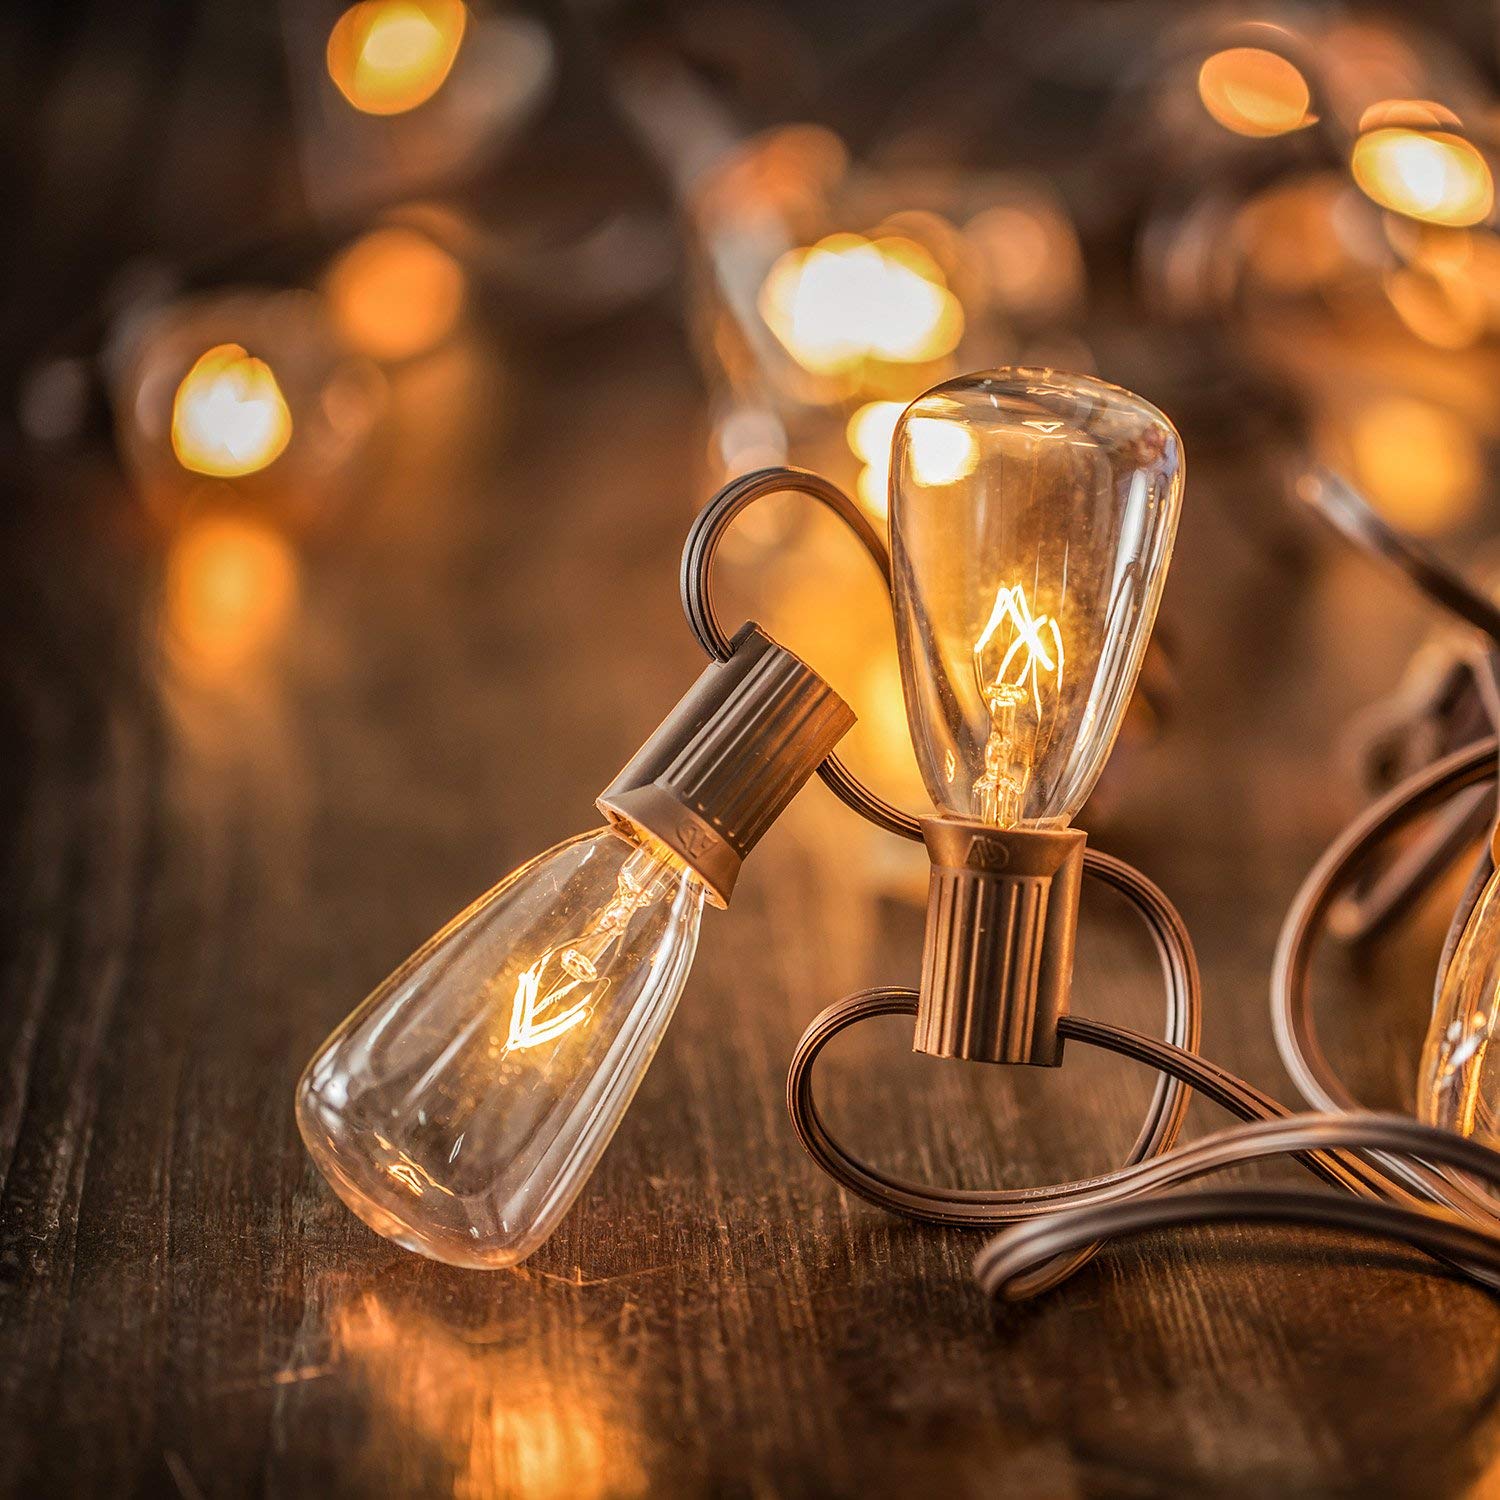 Decorative Patio String Lights with Edison Bulb Manufacturer | ZHONGXIN Featured Image